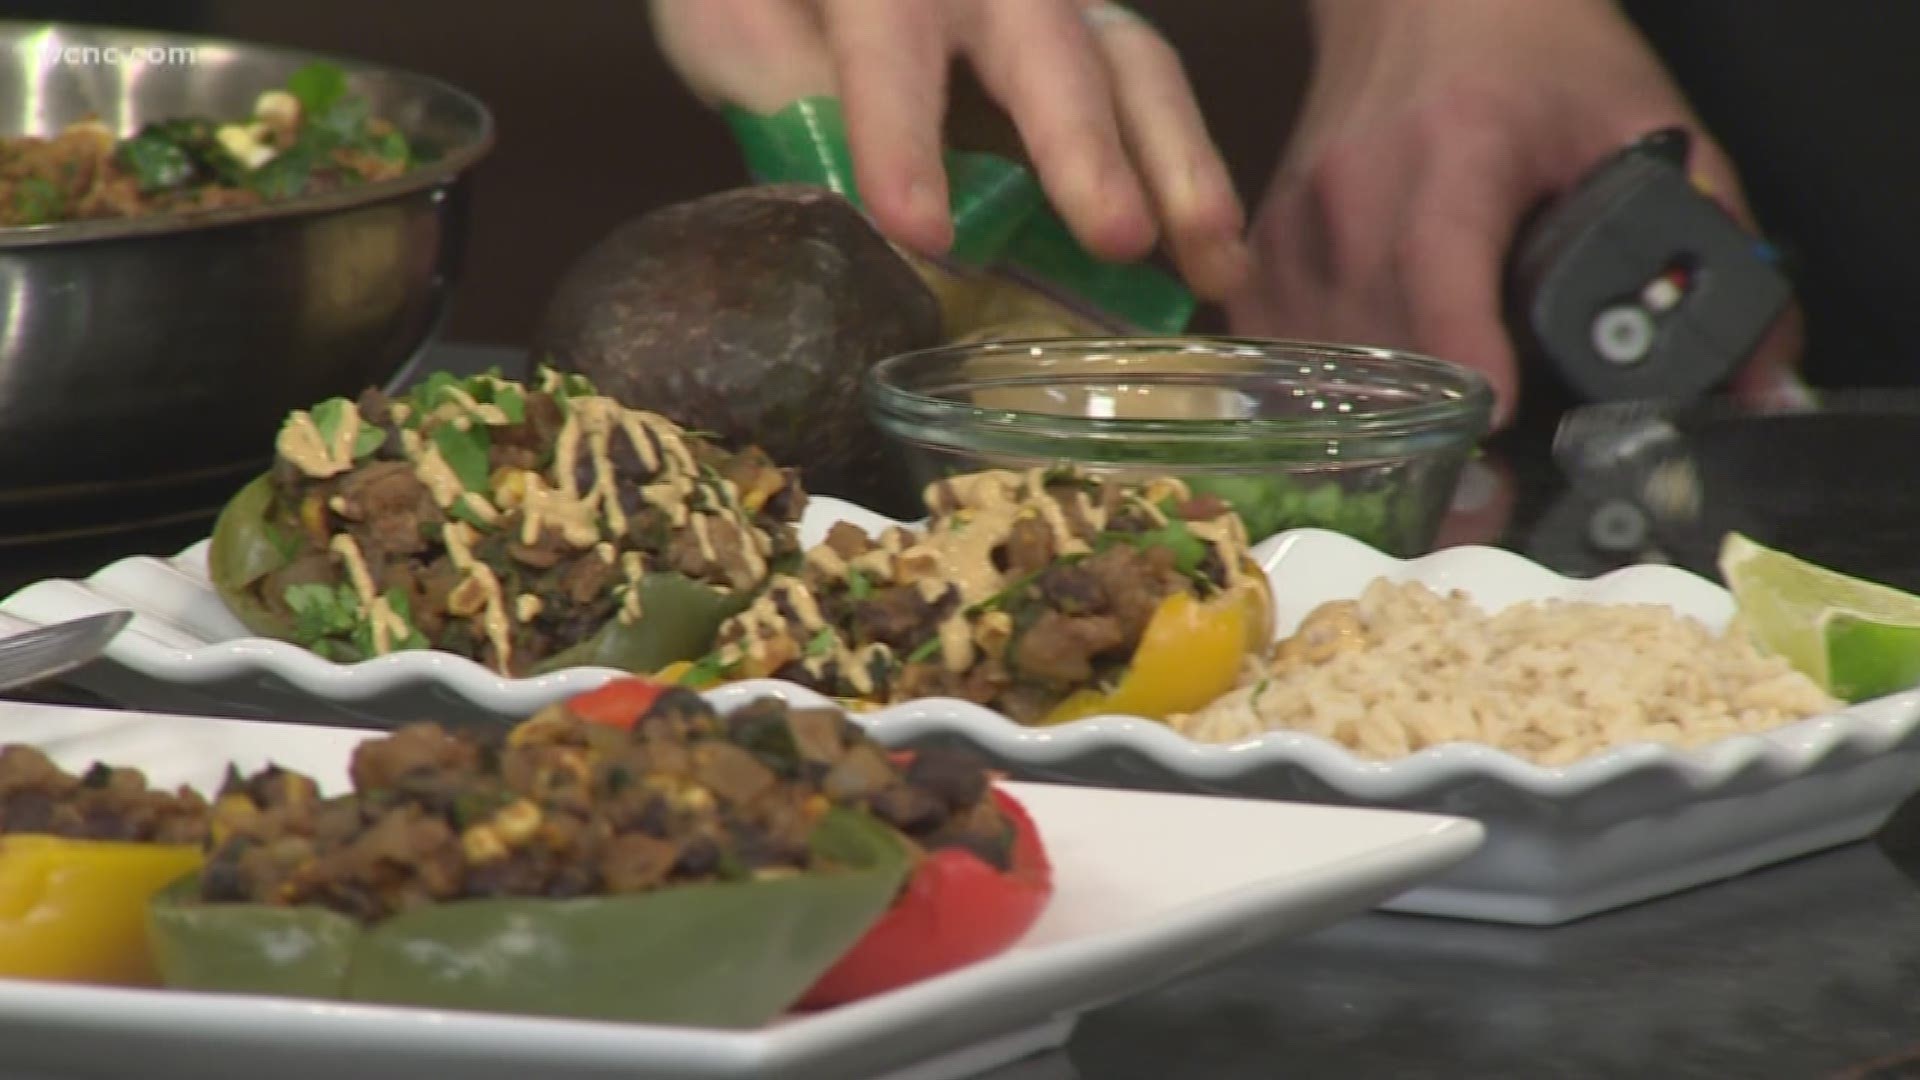 Nutritionist, Samantha Eaton makes her healthy and delicious Mexican stuffed peppers recipe.